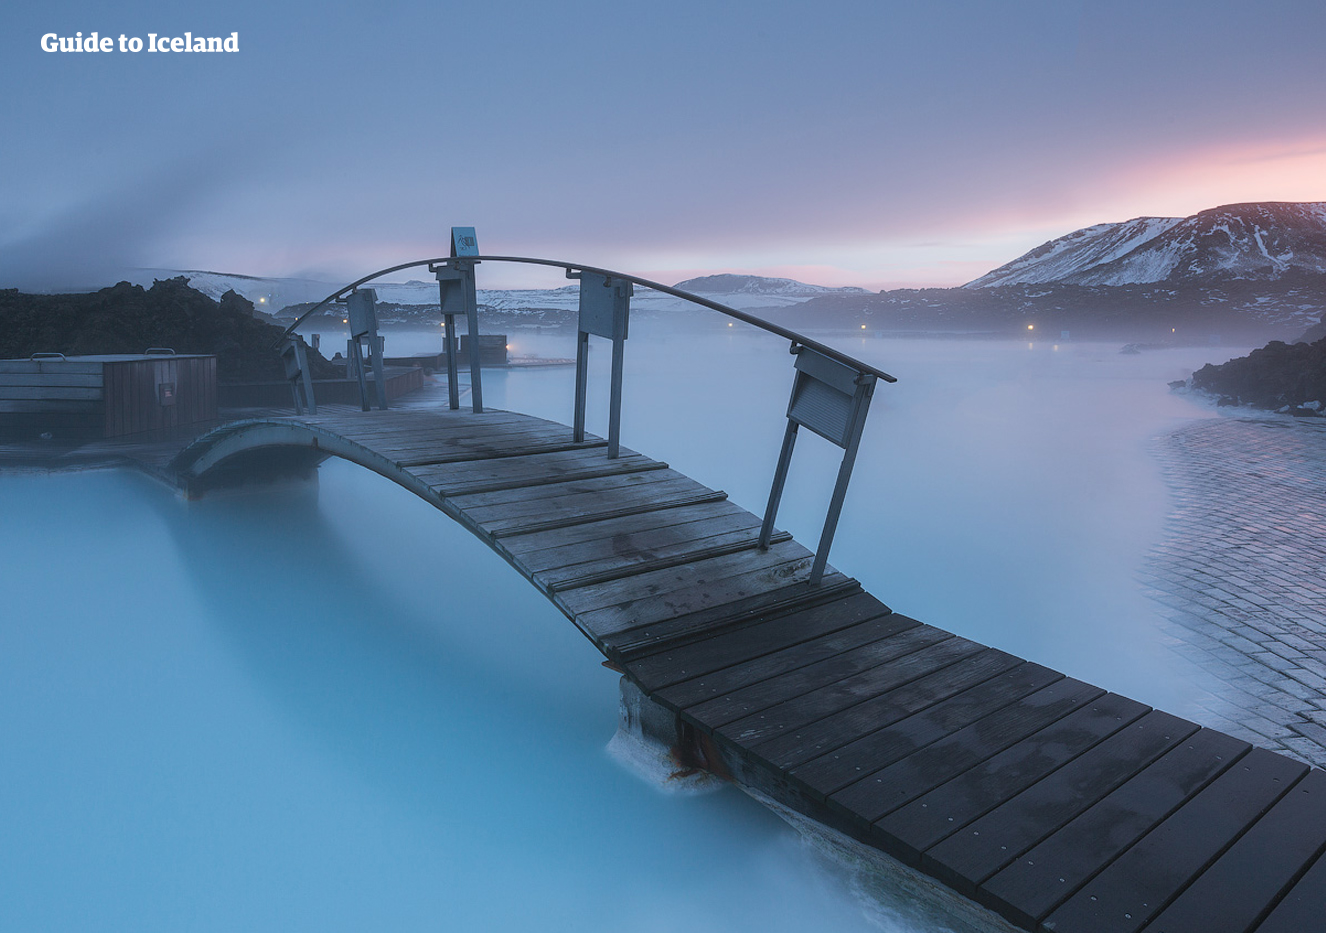 The azure waters of the Blue Lagoon, situated in the Reykjanes Peninsula, in southern Iceland.